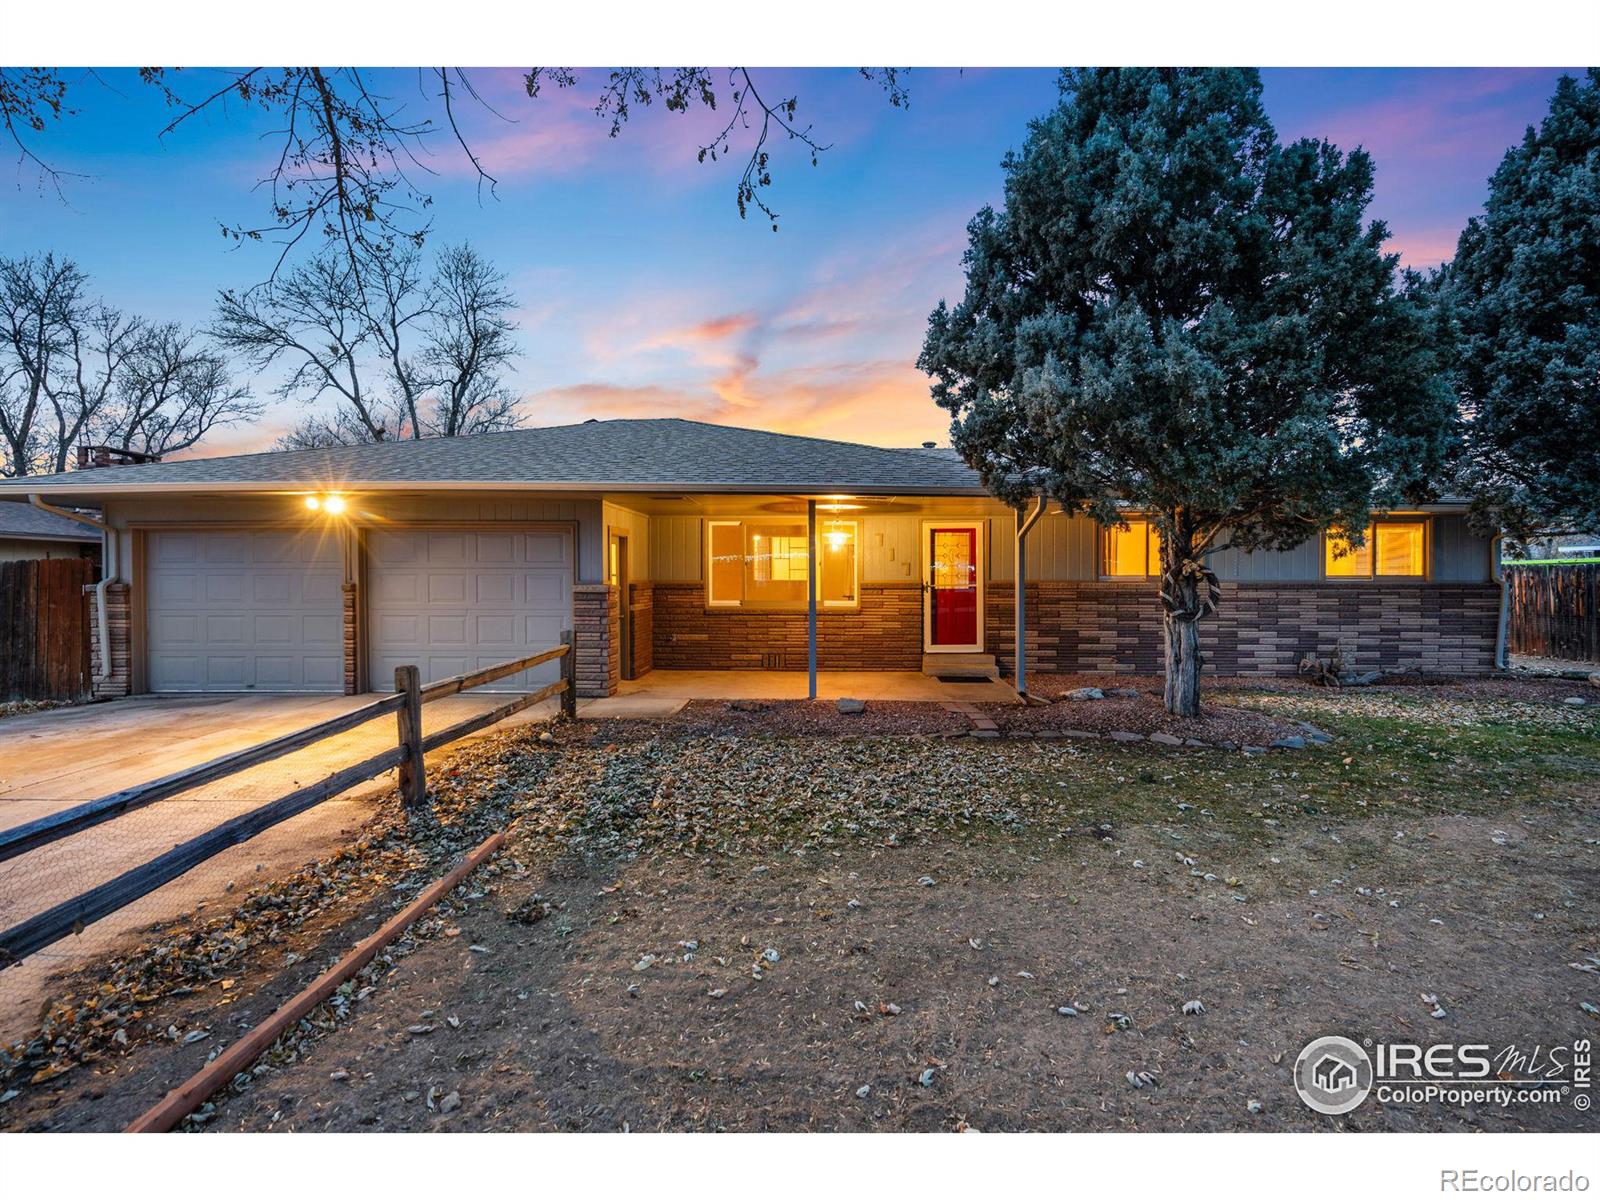 717  Greenbriar Drive, fort collins MLS: 4567891000621 Beds: 3 Baths: 2 Price: $529,900